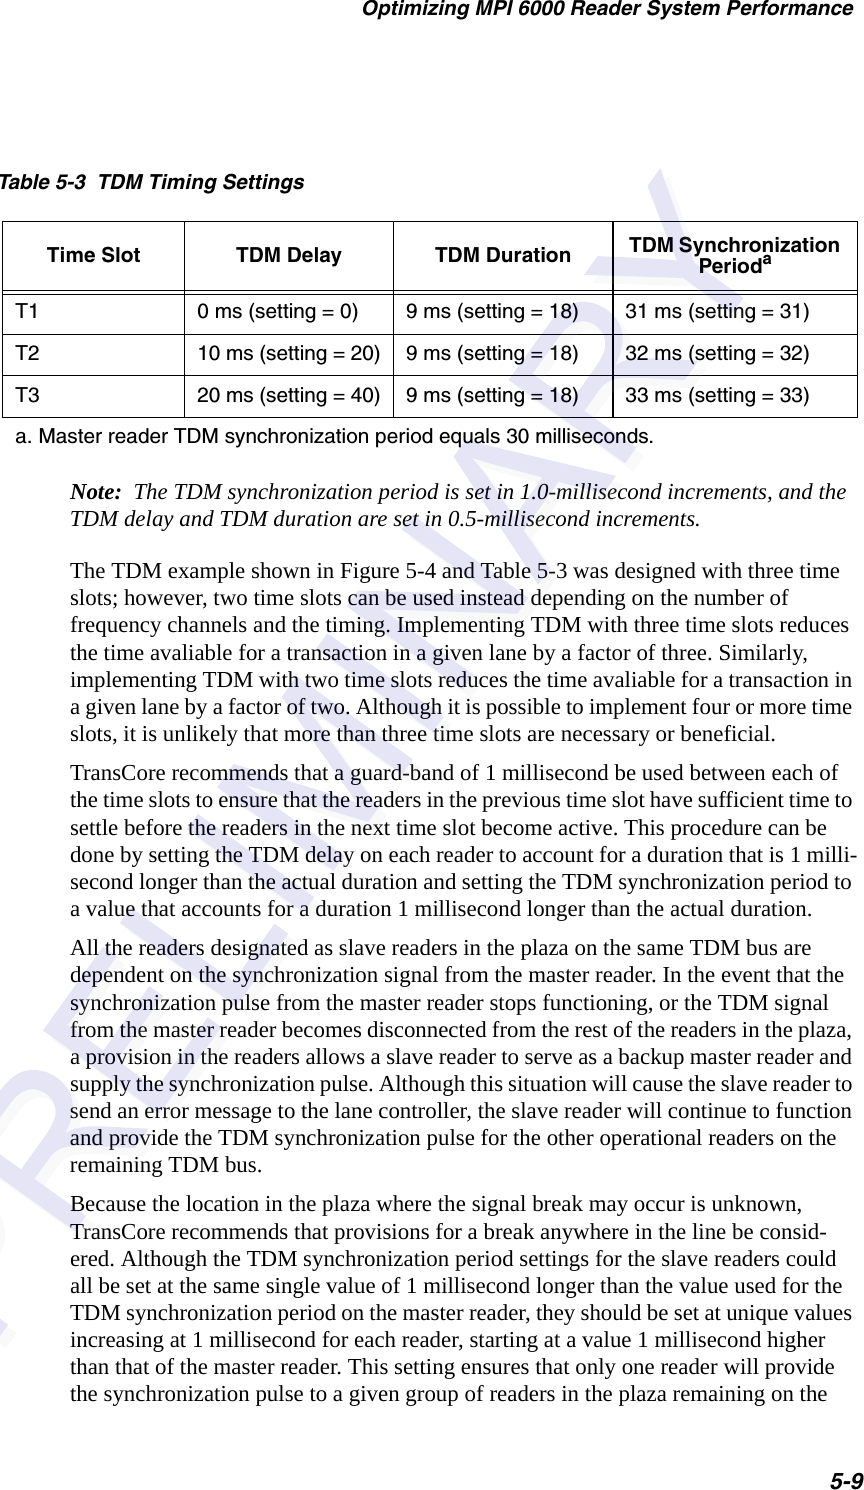 Optimizing MPI 6000 Reader System Performance5-9Note:  The TDM synchronization period is set in 1.0-millisecond increments, and the TDM delay and TDM duration are set in 0.5-millisecond increments.The TDM example shown in Figure 5-4 and Table 5-3 was designed with three time slots; however, two time slots can be used instead depending on the number of frequency channels and the timing. Implementing TDM with three time slots reduces the time avaliable for a transaction in a given lane by a factor of three. Similarly, implementing TDM with two time slots reduces the time avaliable for a transaction in a given lane by a factor of two. Although it is possible to implement four or more time slots, it is unlikely that more than three time slots are necessary or beneficial.TransCore recommends that a guard-band of 1 millisecond be used between each of the time slots to ensure that the readers in the previous time slot have sufficient time to settle before the readers in the next time slot become active. This procedure can be done by setting the TDM delay on each reader to account for a duration that is 1 milli-second longer than the actual duration and setting the TDM synchronization period to a value that accounts for a duration 1 millisecond longer than the actual duration.All the readers designated as slave readers in the plaza on the same TDM bus are dependent on the synchronization signal from the master reader. In the event that the synchronization pulse from the master reader stops functioning, or the TDM signal from the master reader becomes disconnected from the rest of the readers in the plaza, a provision in the readers allows a slave reader to serve as a backup master reader and supply the synchronization pulse. Although this situation will cause the slave reader to send an error message to the lane controller, the slave reader will continue to function and provide the TDM synchronization pulse for the other operational readers on the remaining TDM bus.Because the location in the plaza where the signal break may occur is unknown, TransCore recommends that provisions for a break anywhere in the line be consid-ered. Although the TDM synchronization period settings for the slave readers could all be set at the same single value of 1 millisecond longer than the value used for the TDM synchronization period on the master reader, they should be set at unique values increasing at 1 millisecond for each reader, starting at a value 1 millisecond higher than that of the master reader. This setting ensures that only one reader will provide the synchronization pulse to a given group of readers in the plaza remaining on the Table 5-3  TDM Timing SettingsTime Slot TDM Delay TDM Duration TDM Synchronization PeriodaT1 0 ms (setting = 0) 9 ms (setting = 18) 31 ms (setting = 31)T2 10 ms (setting = 20) 9 ms (setting = 18) 32 ms (setting = 32)T3 20 ms (setting = 40) 9 ms (setting = 18) 33 ms (setting = 33)a. Master reader TDM synchronization period equals 30 milliseconds.